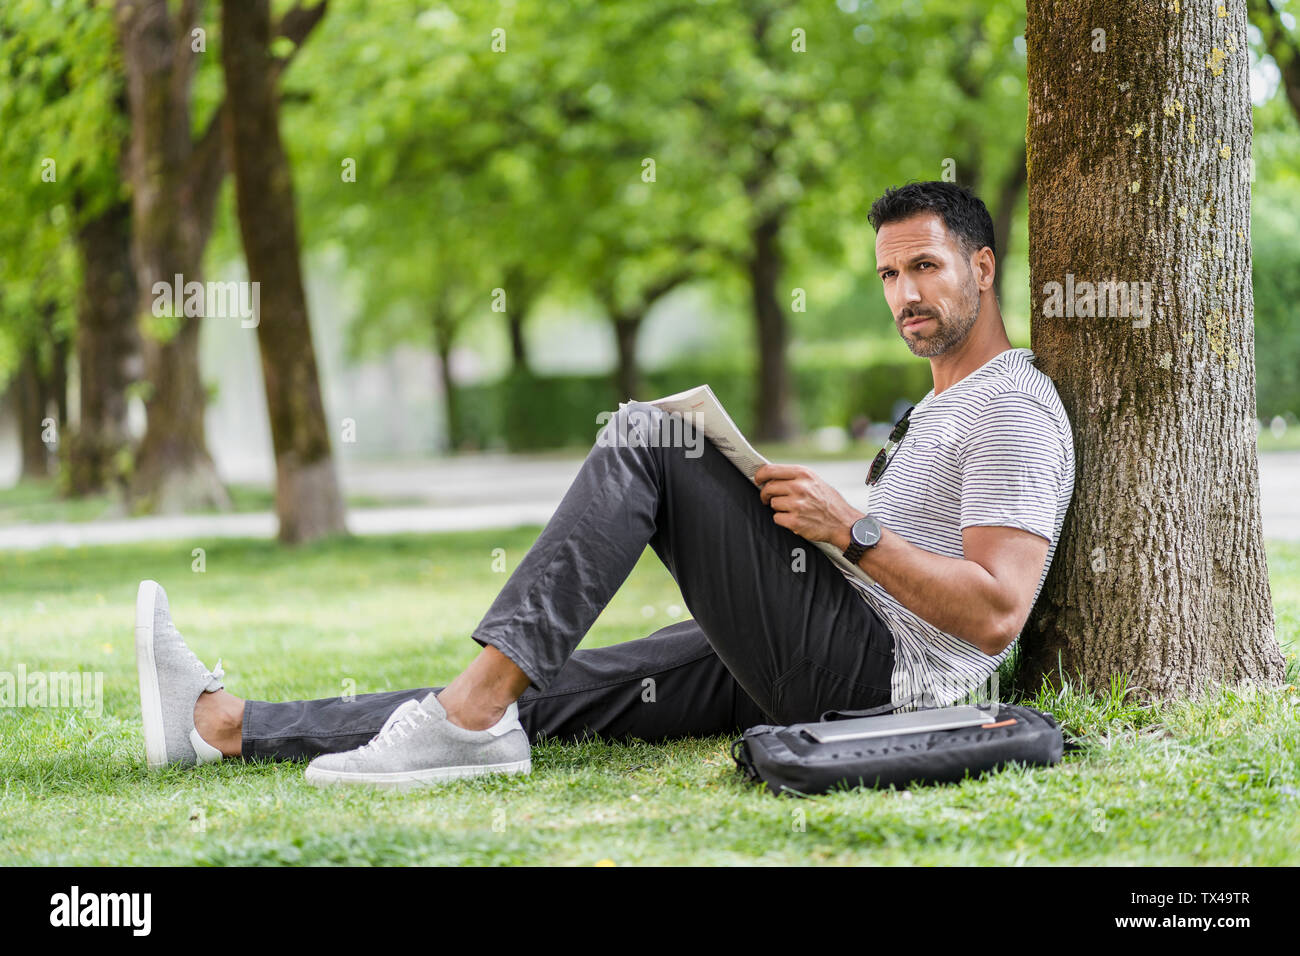 Man leaning against a tree in park reading newspaper Stock Photo